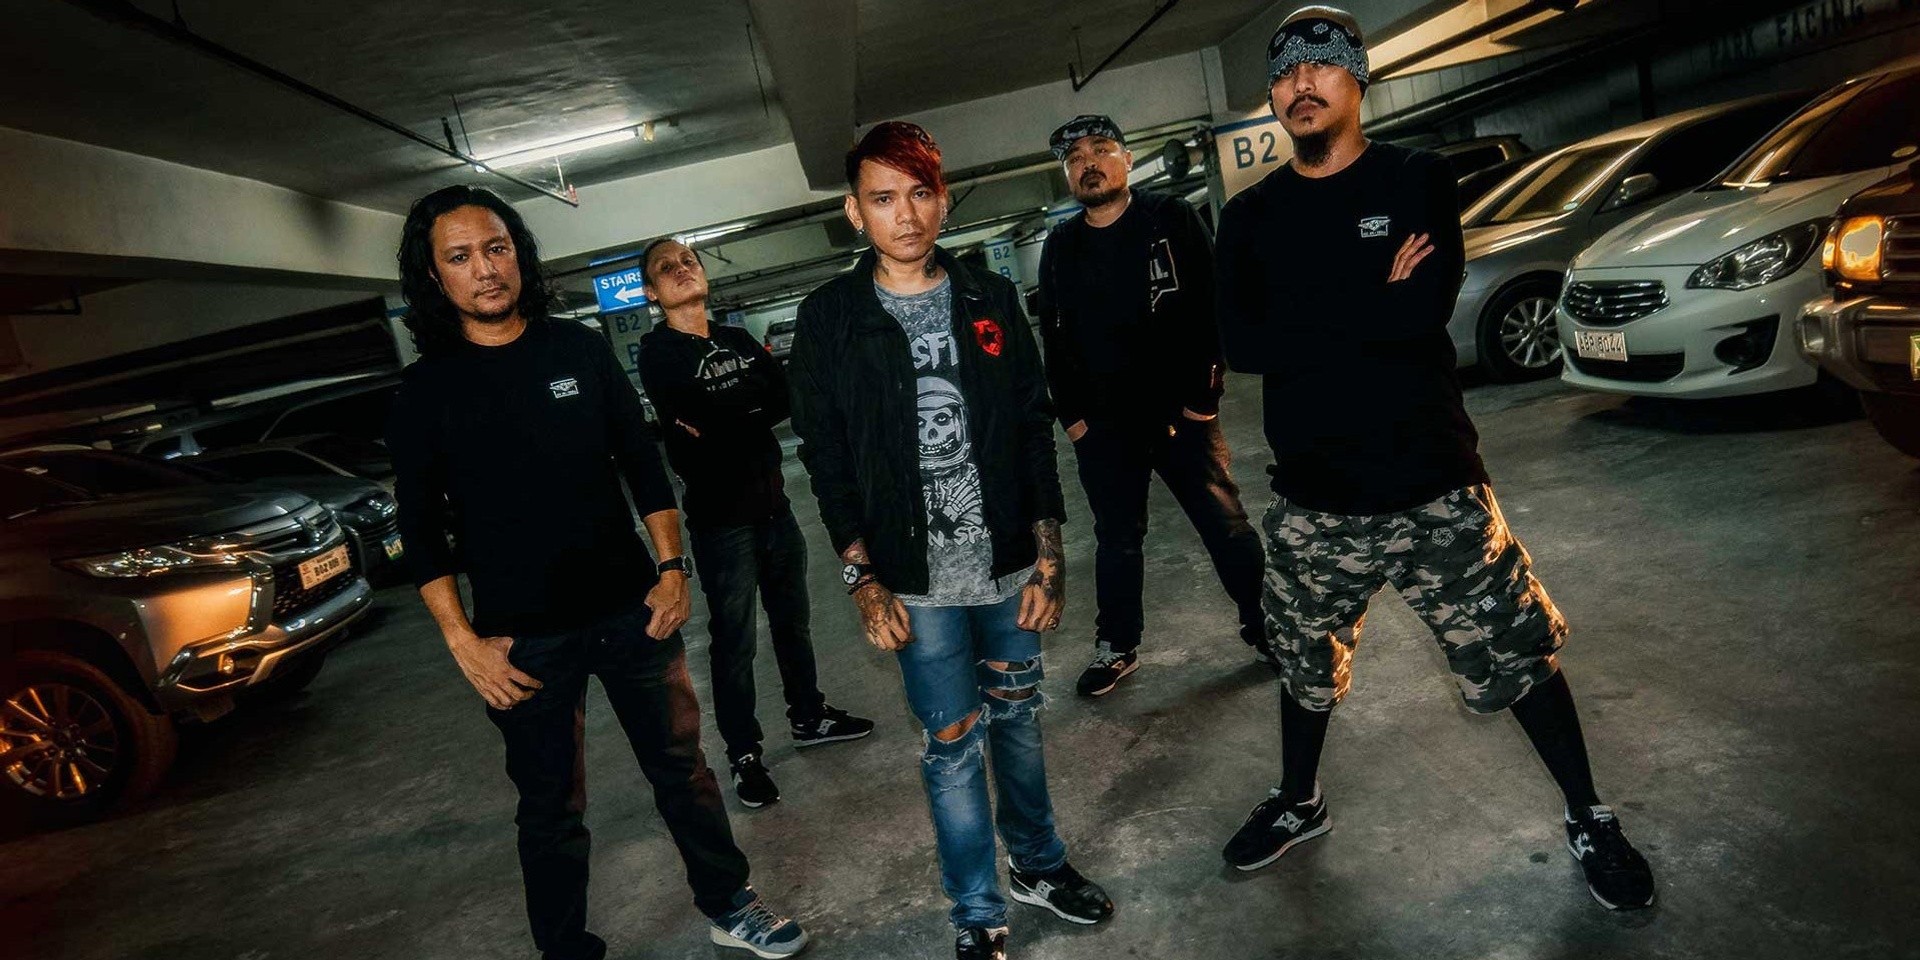 Valley Of Chrome to perform at Indonesia's Hammersonic 2018